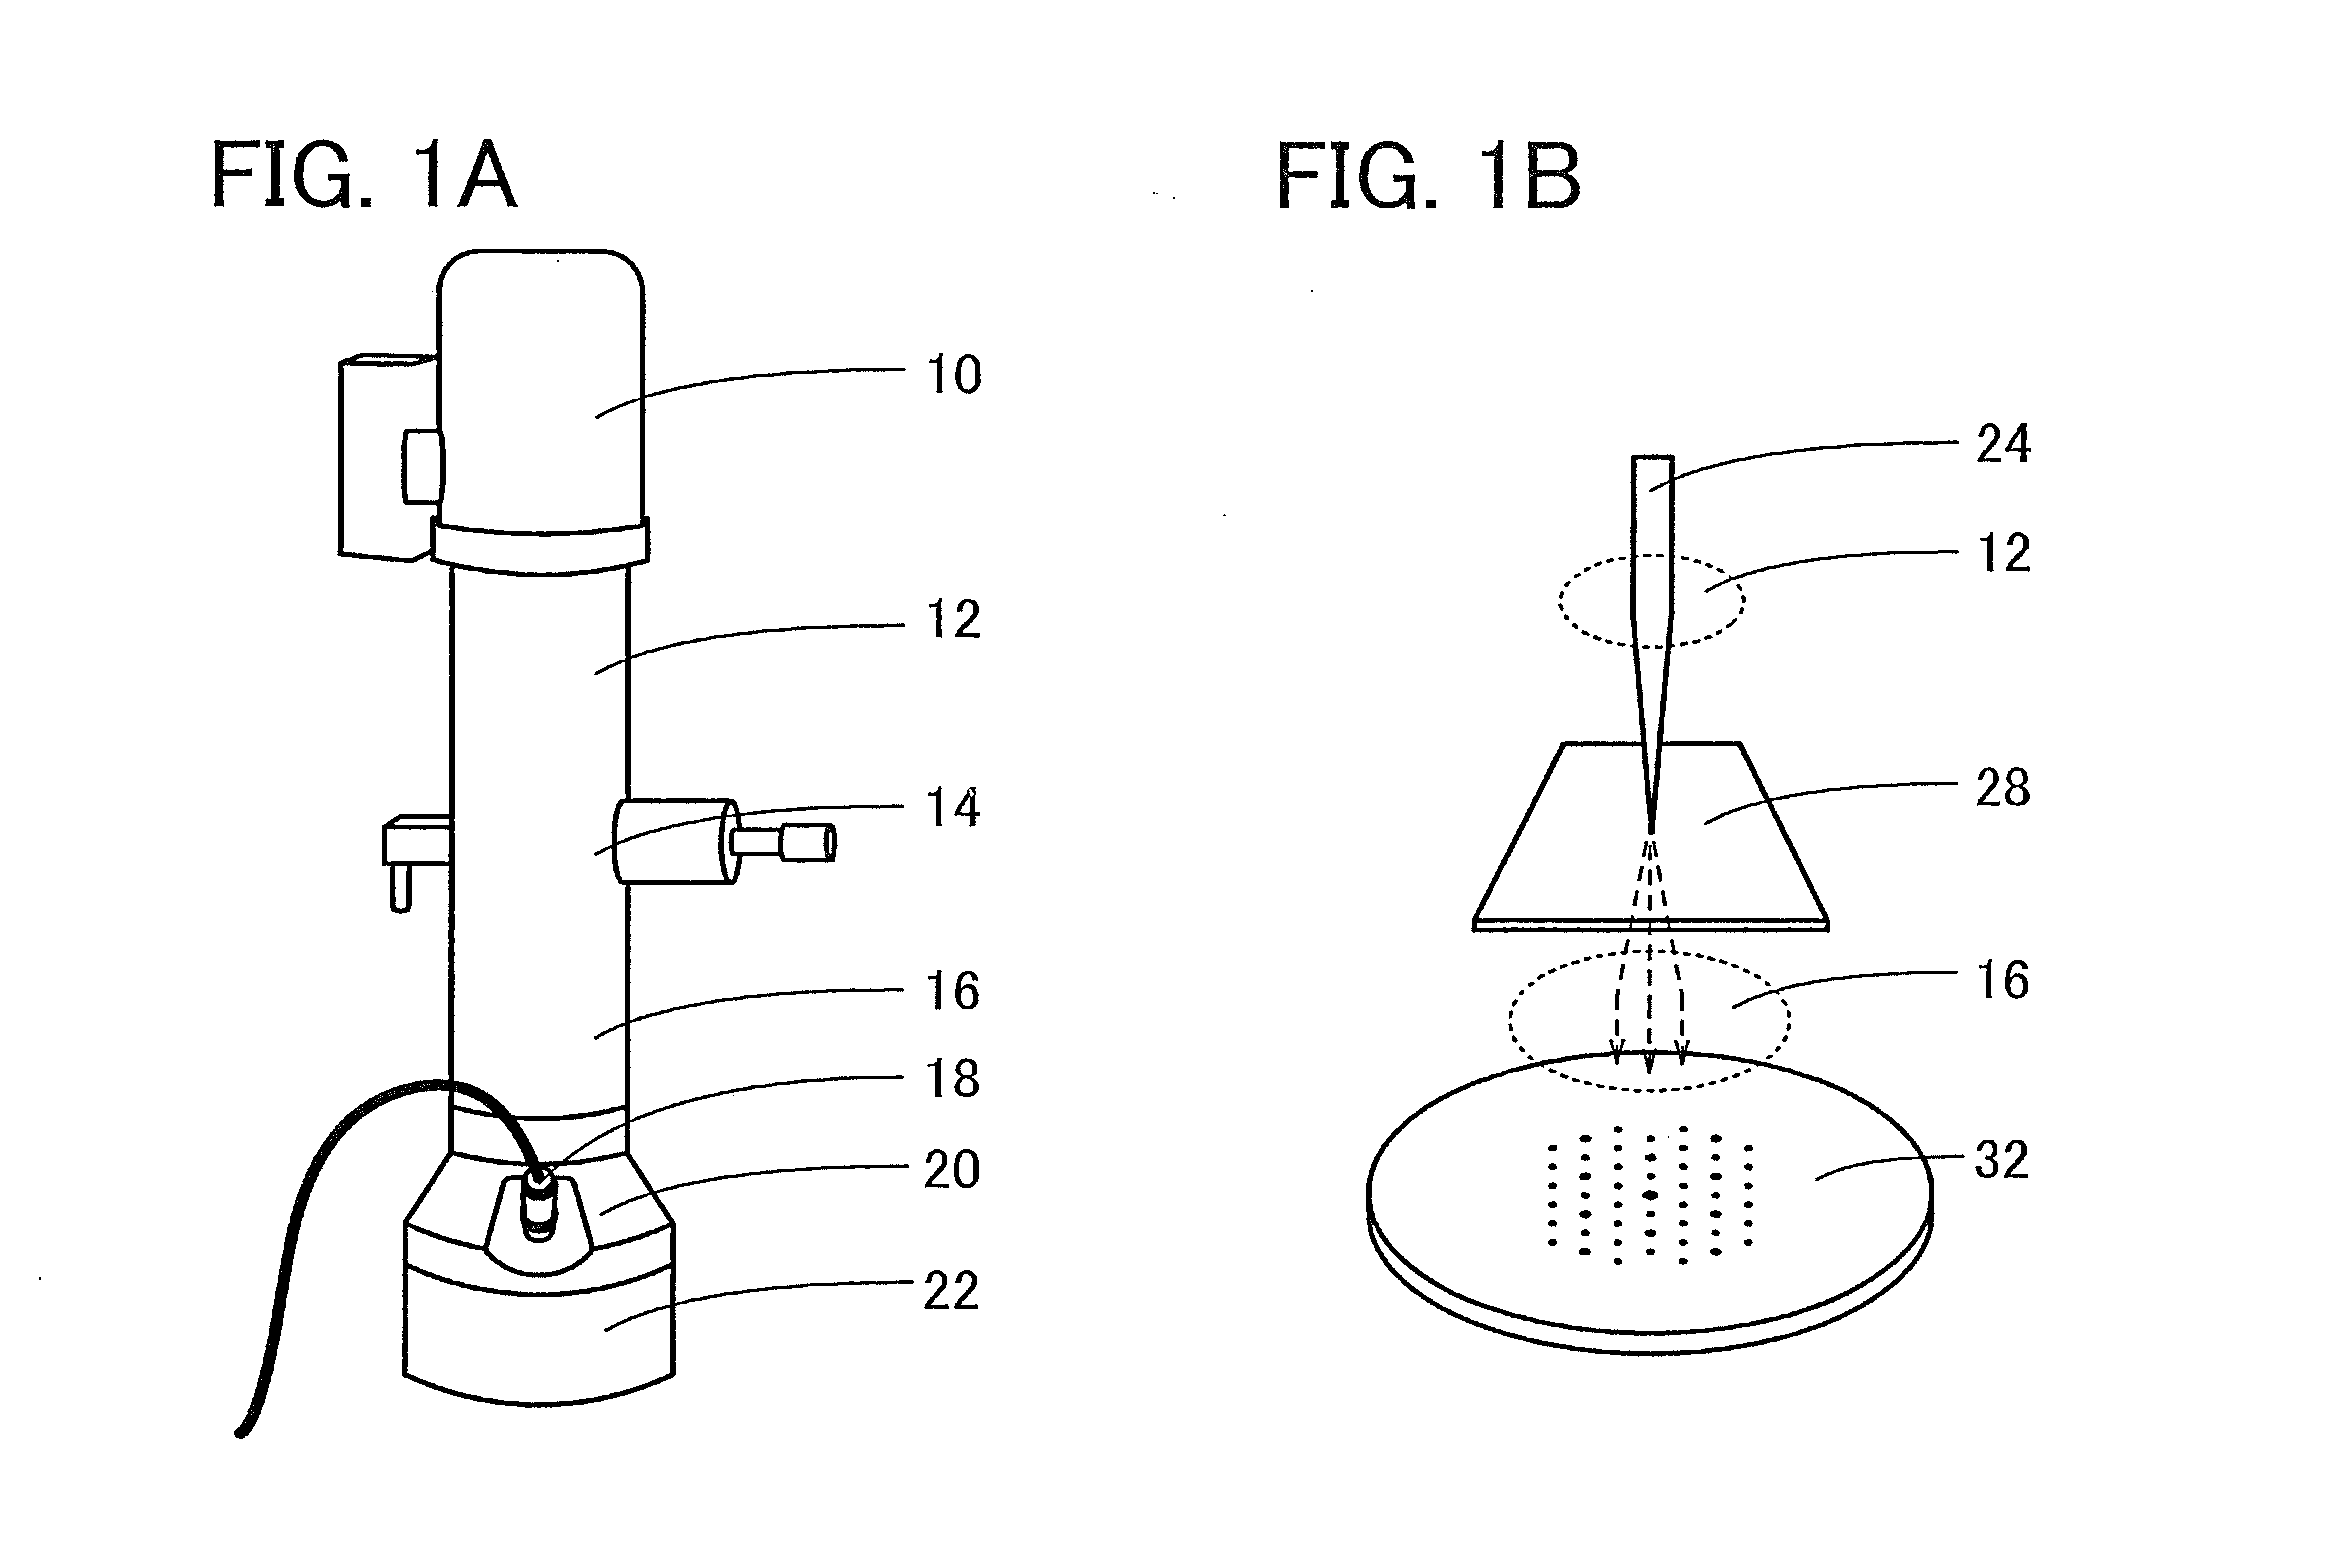 Transmission electron diffraction measurement apparatus and method for measuring transmission electron diffraction pattern